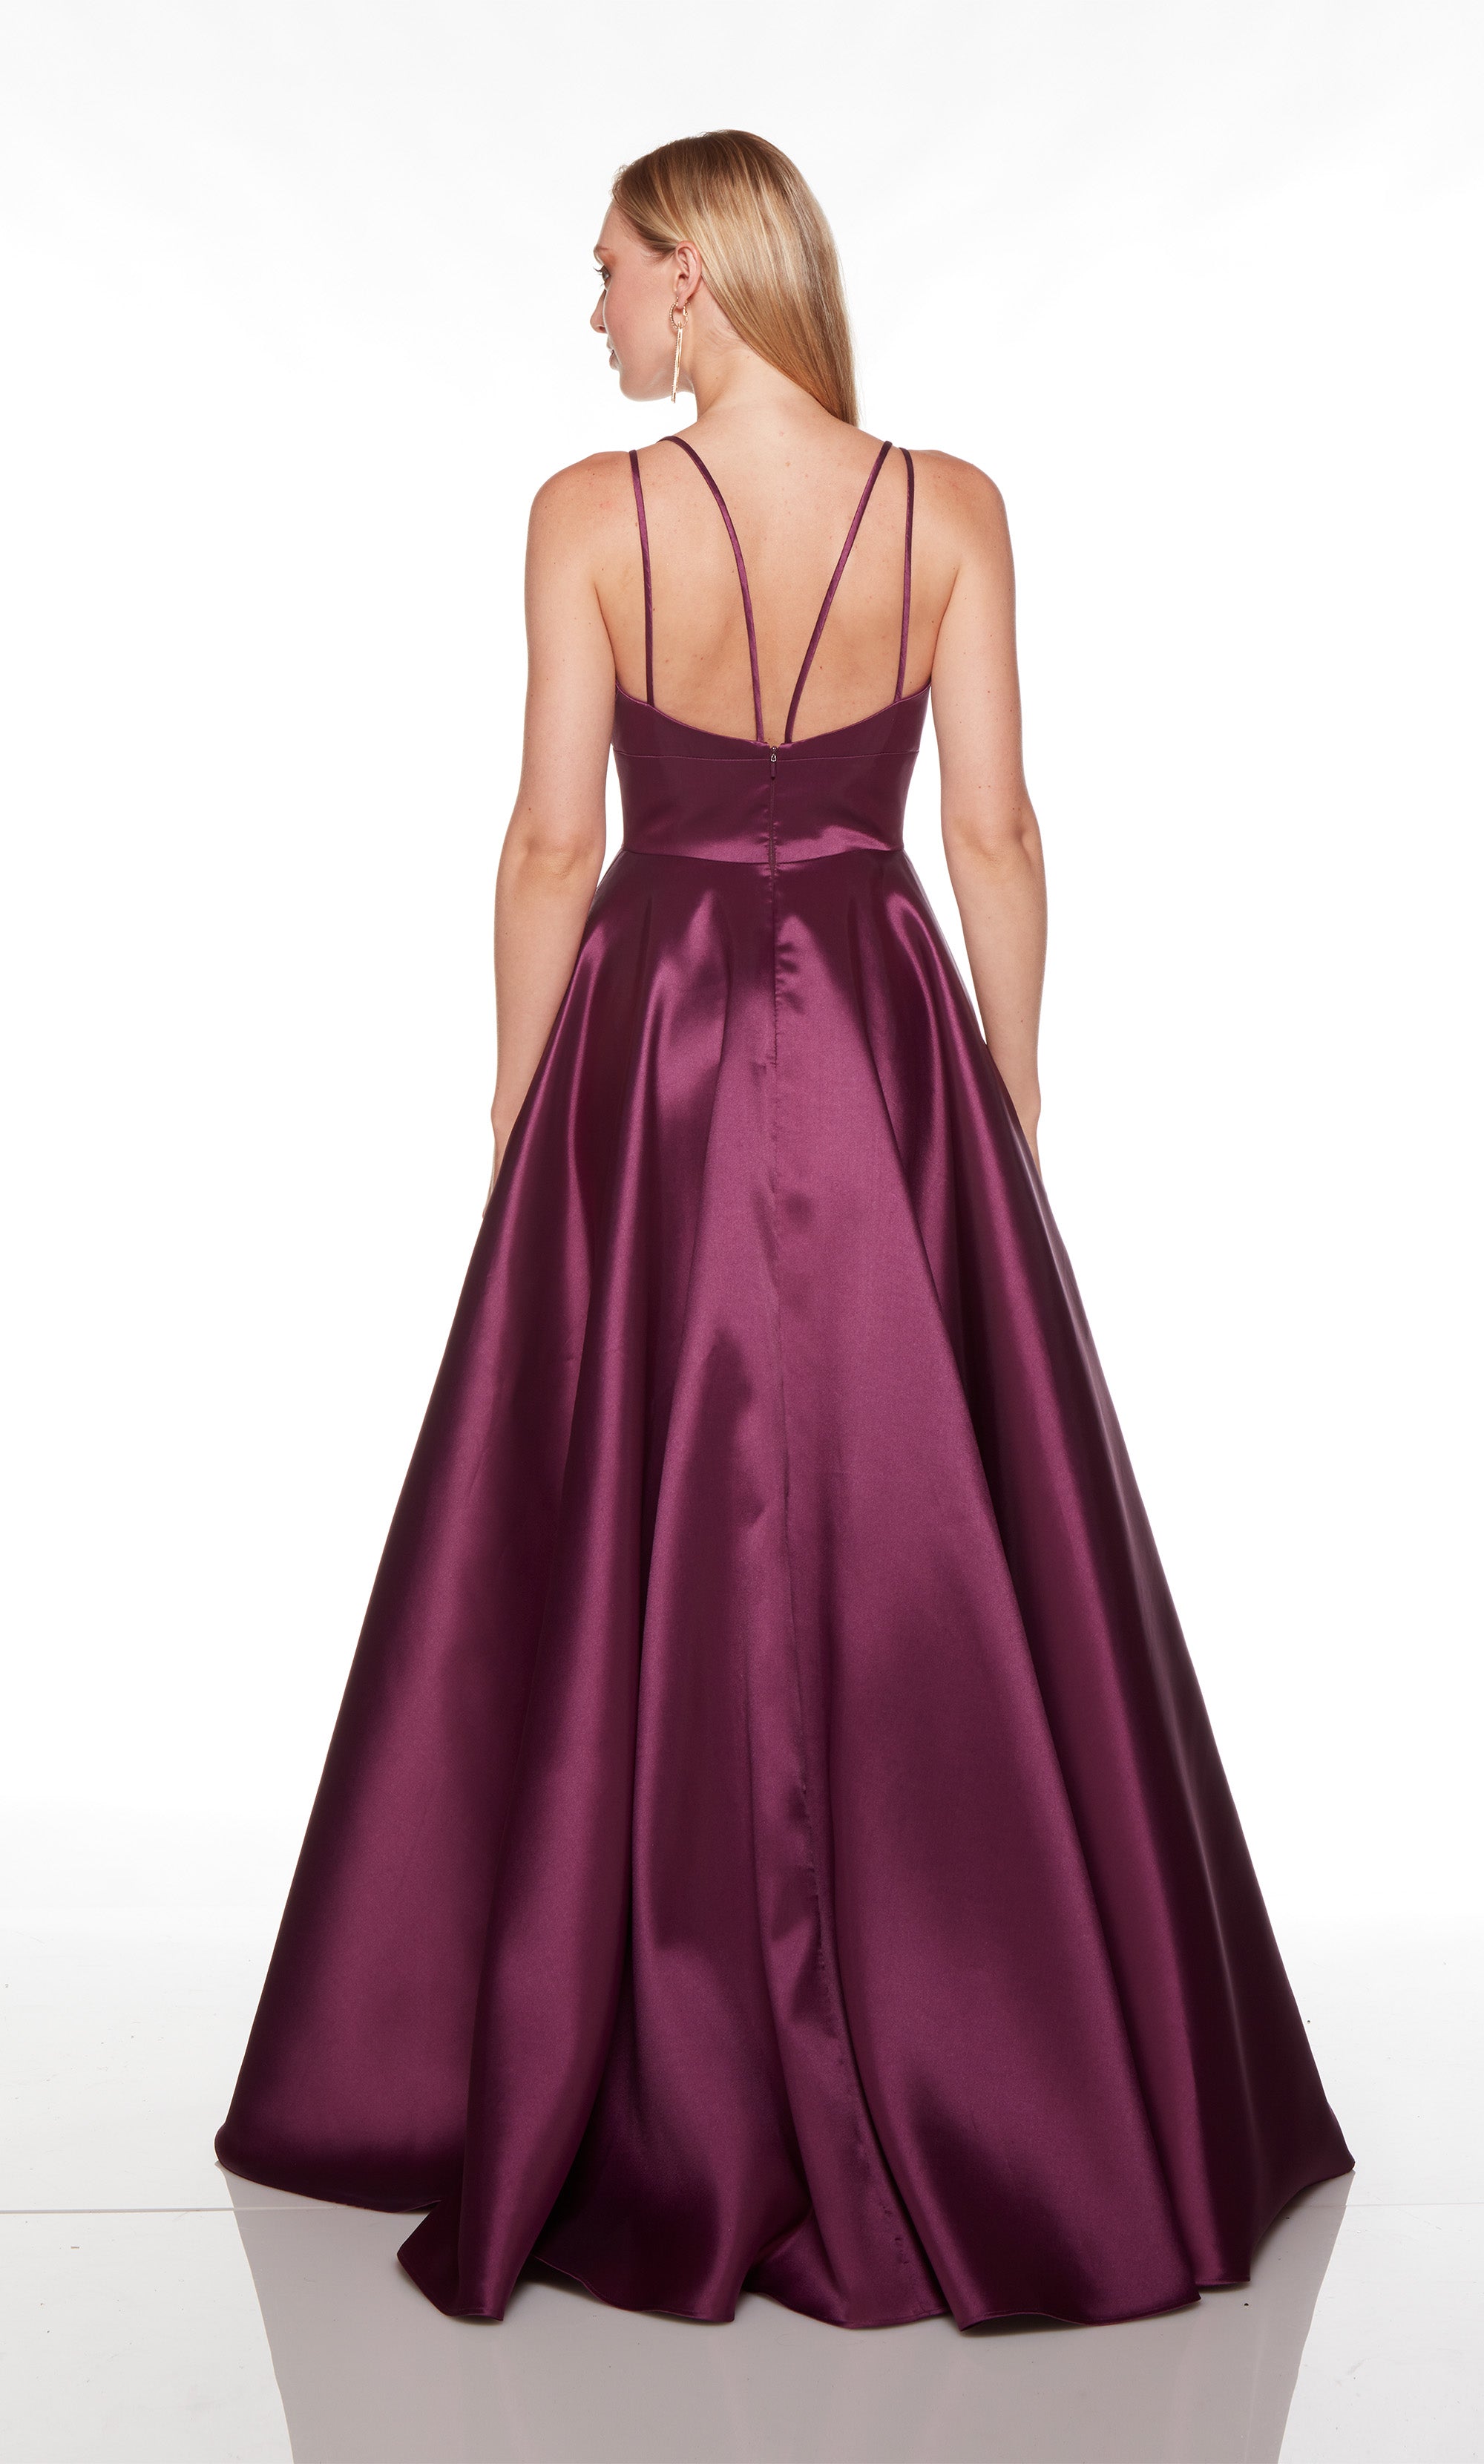 Sweetheart ballgown prom dress with pockets in the color black plum. COLOR-SWATCH_1754__BLACK-PLUM